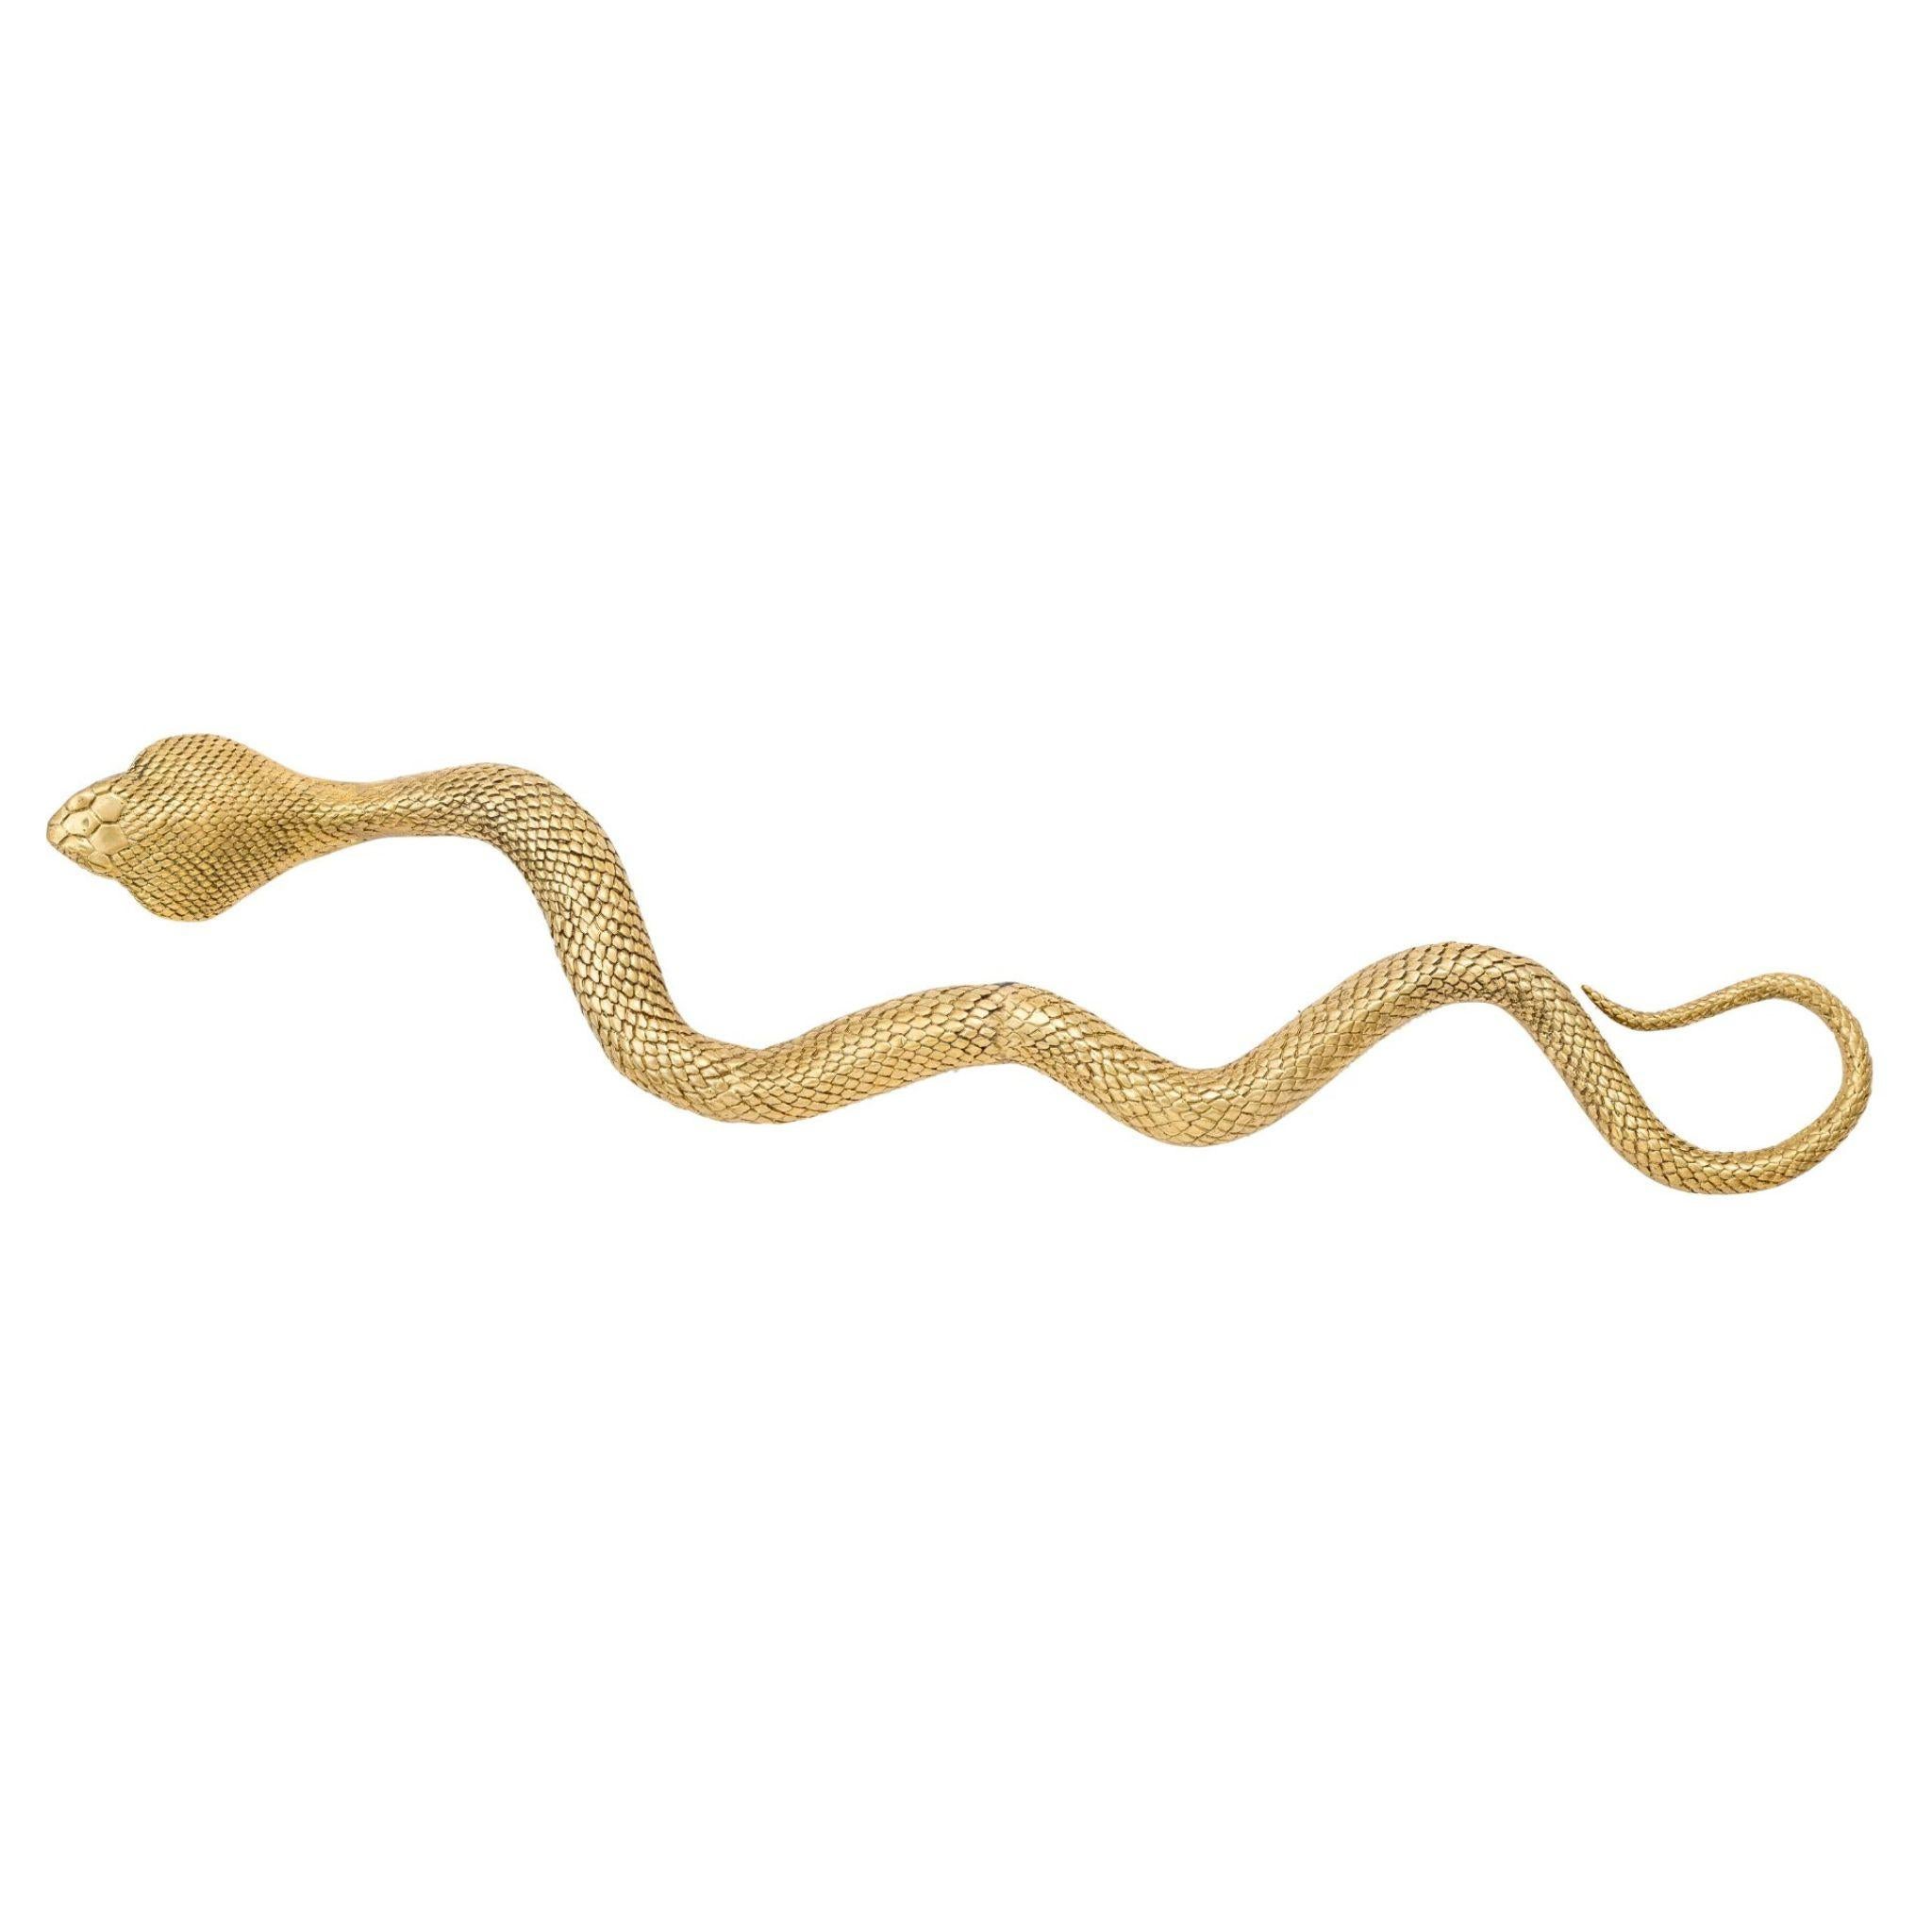 This brass decorative cobra is a stunning statement piece that is sure to catch the eye of anyone who enters your space. The intricate details of the cobra's scales and the fluidity of its body make it a true work of art. The golden sheen of the